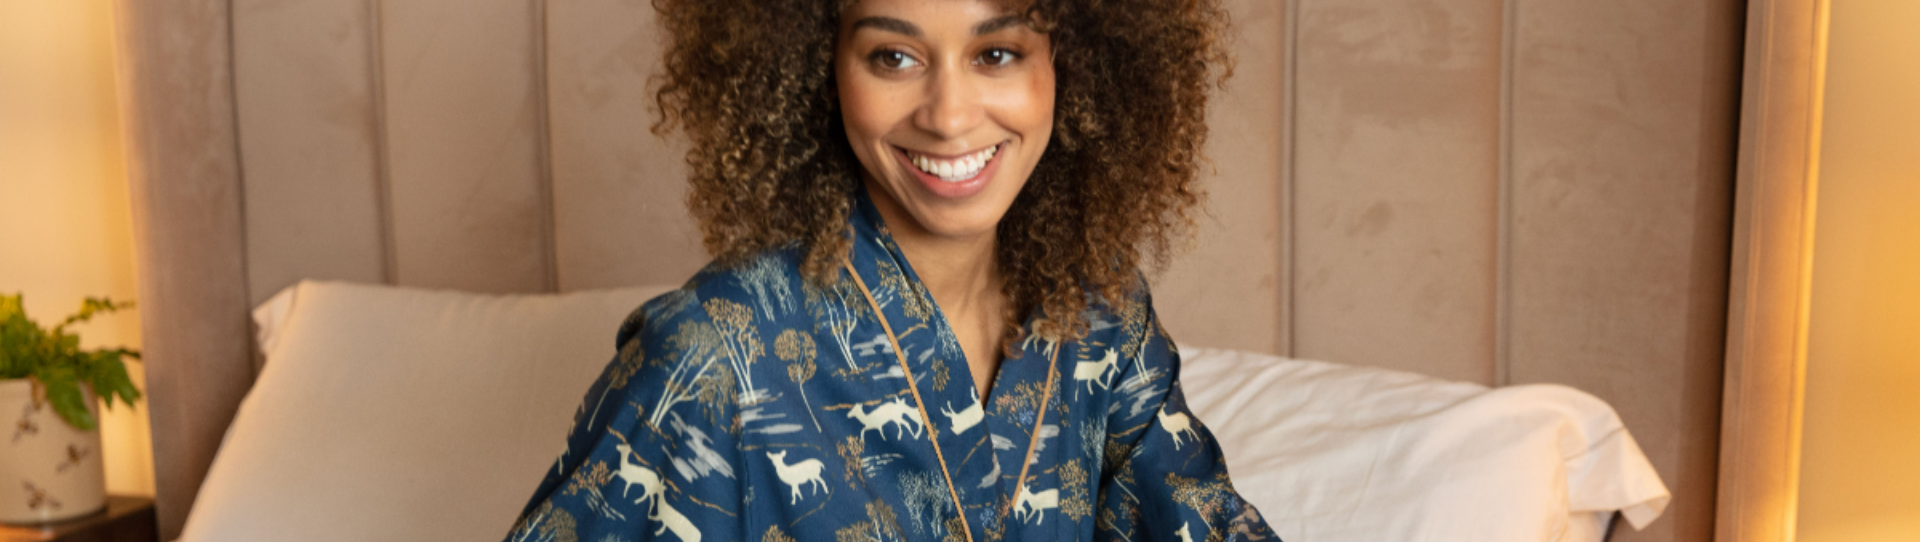 How To Achieve The Viral Heatless Overnight Curls Hack Using Your Dressing Gown